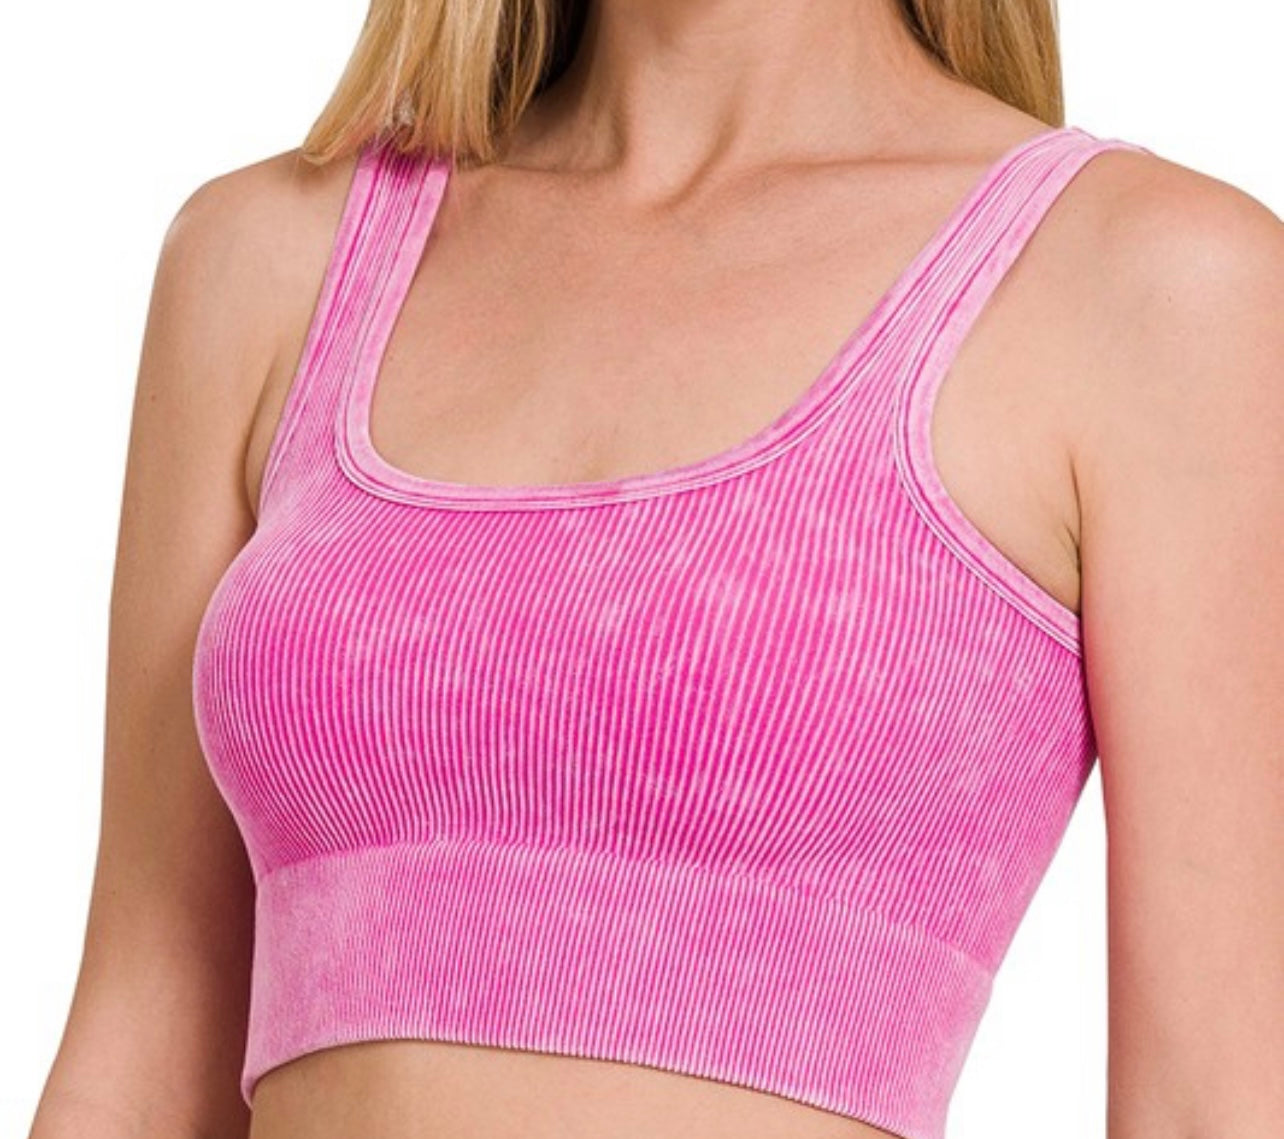 Washed pink cami top